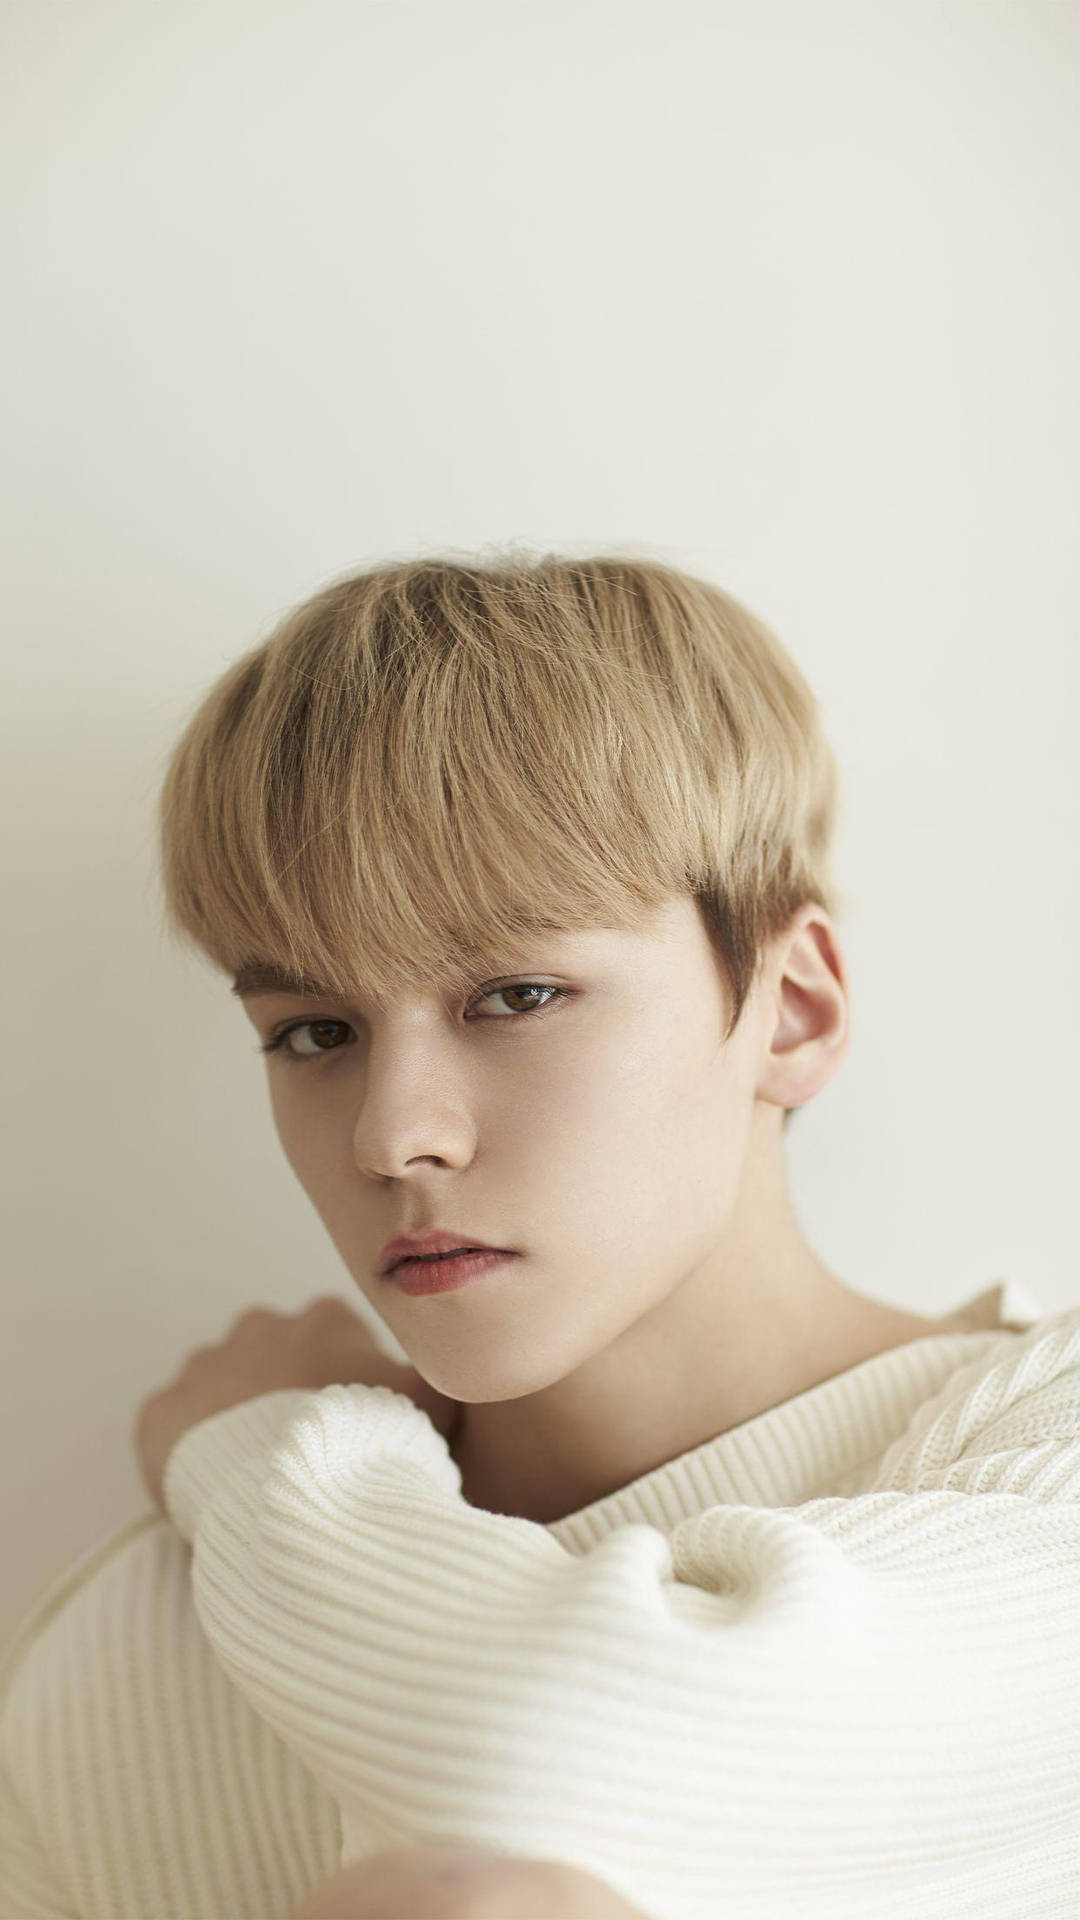 Vernon With Faded Blonde Hair